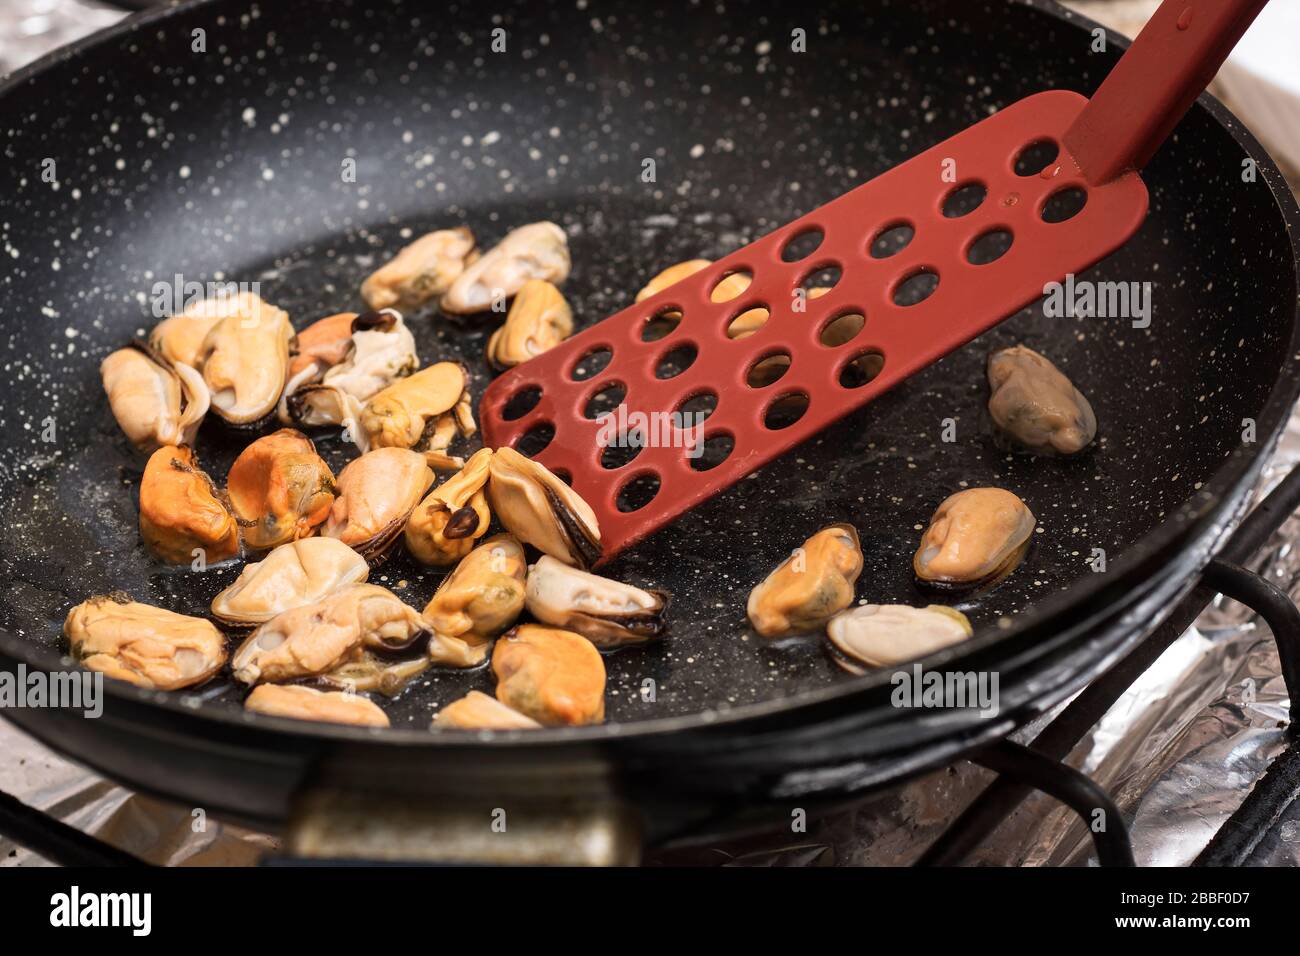 Cooking mussels in frying pan on kitchen stove. Stock Photo